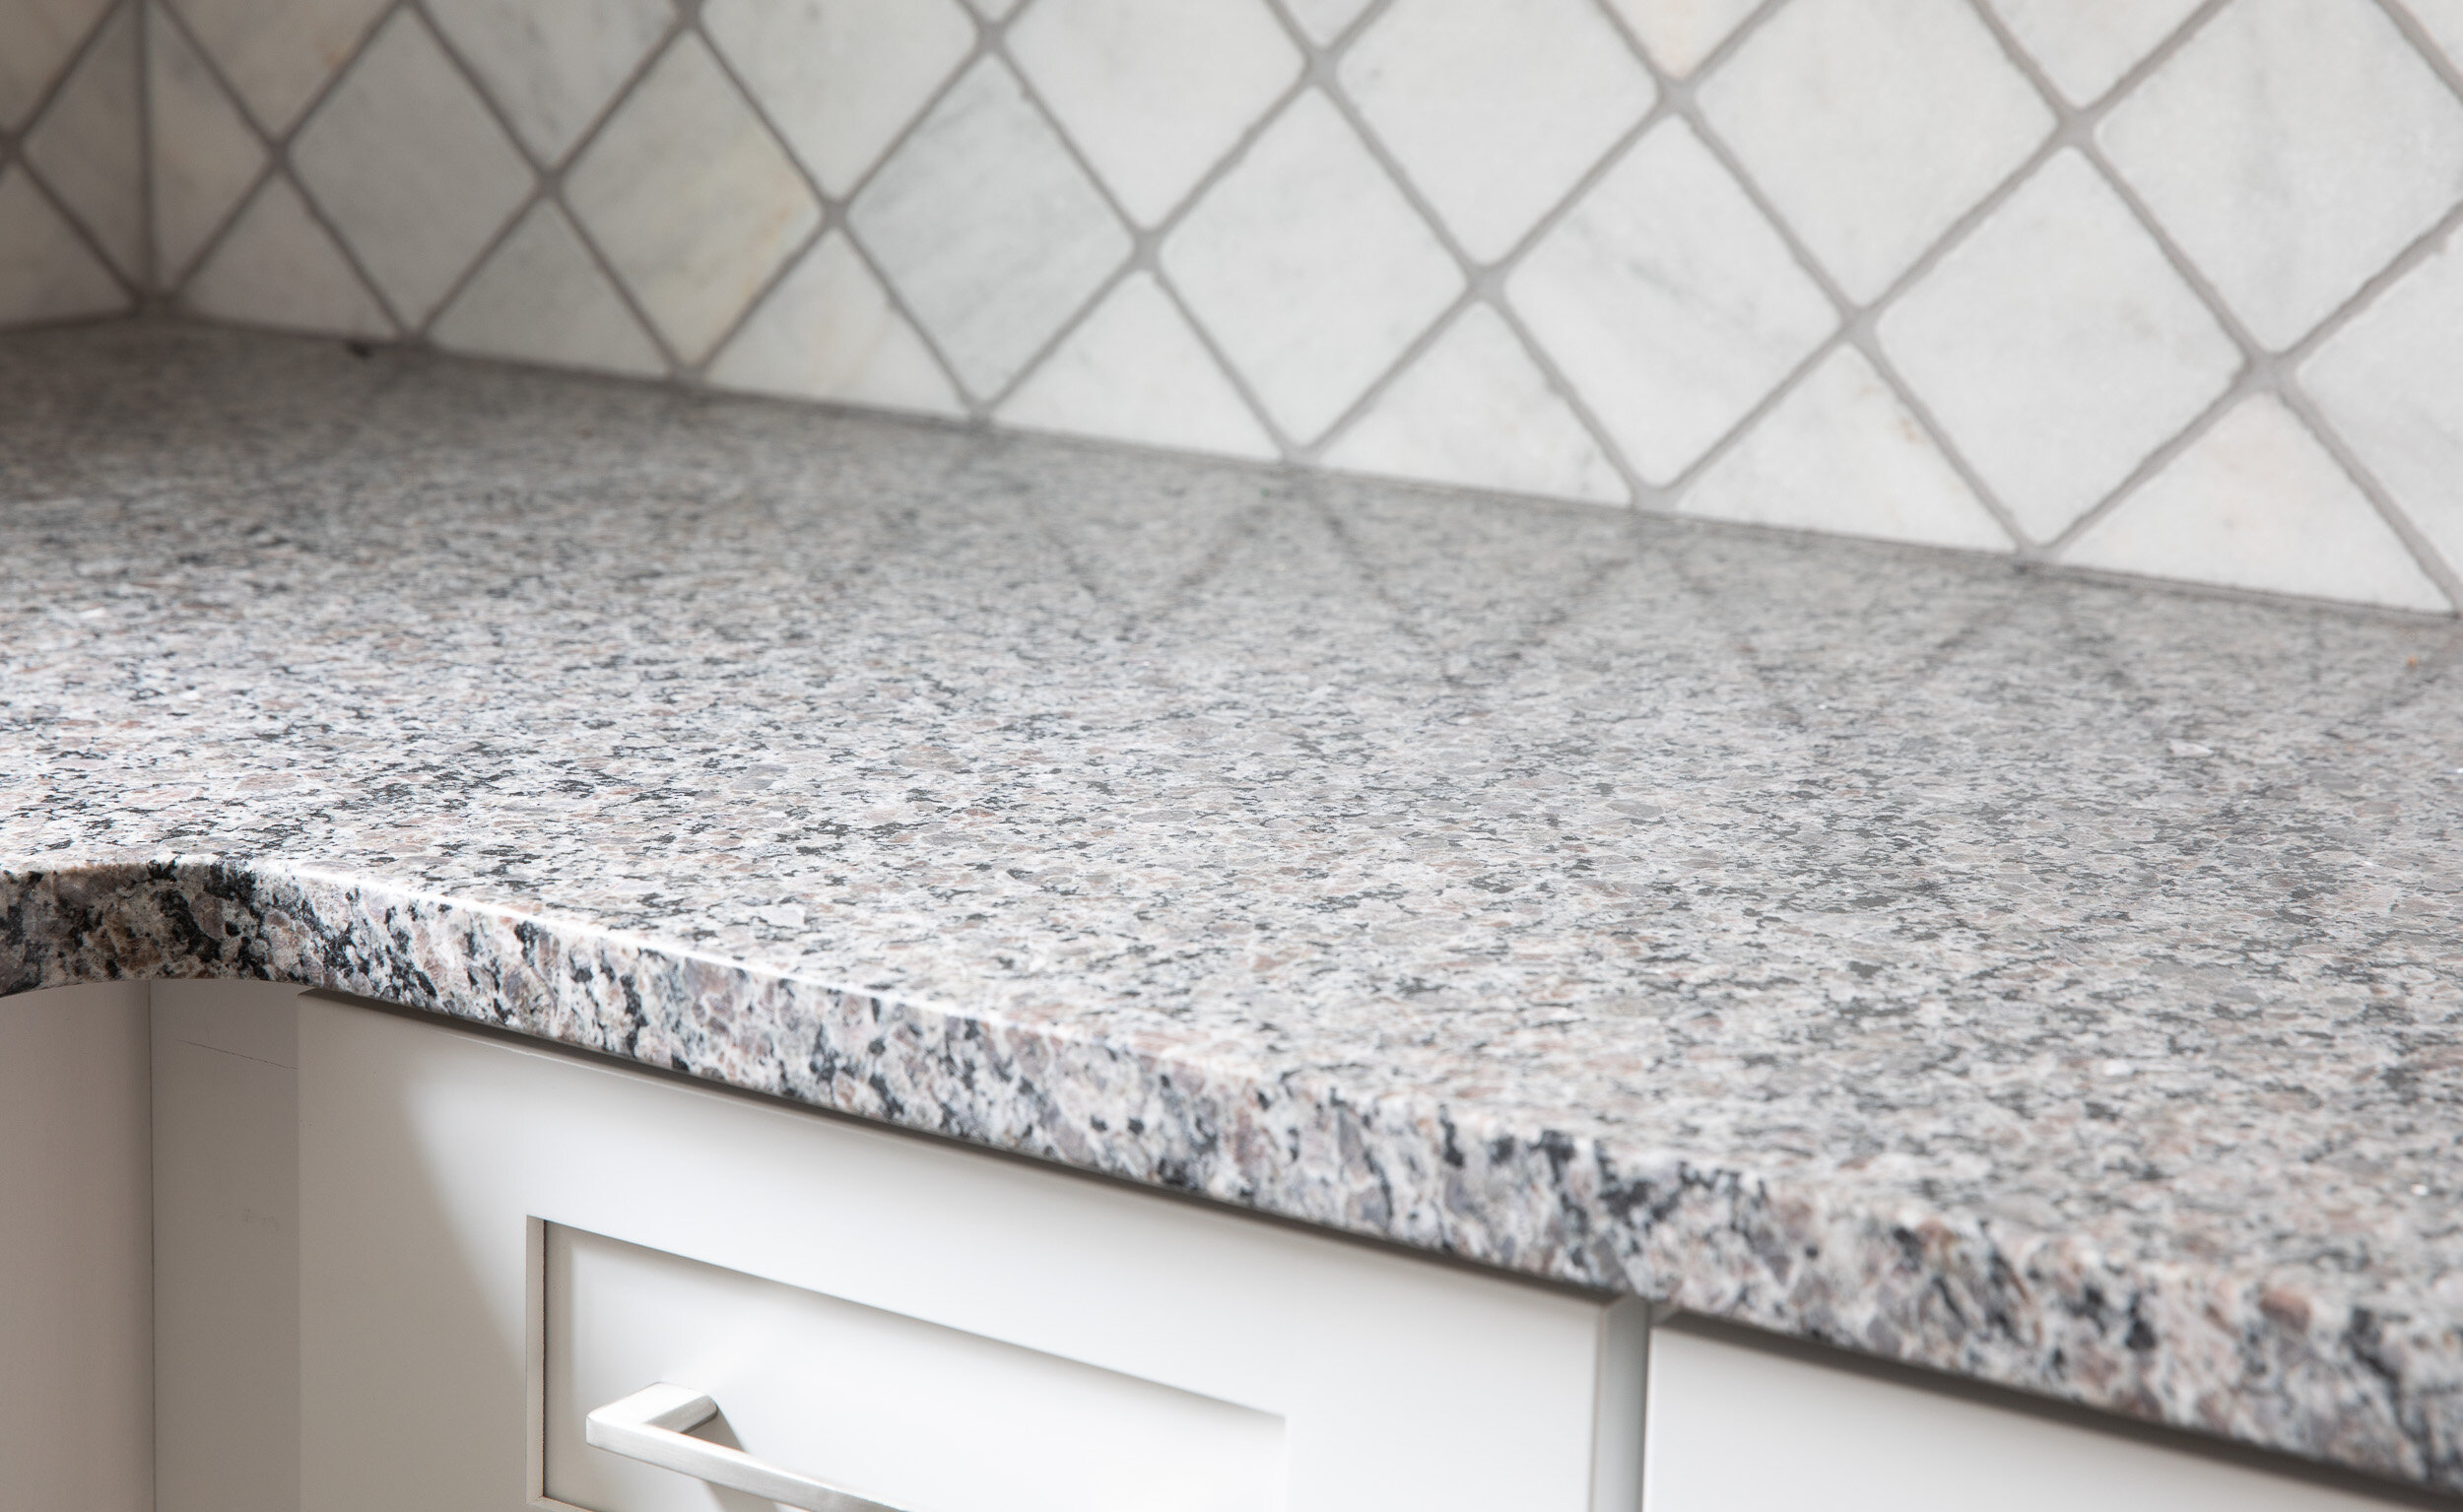 Granite countertop in a newly constructed home.